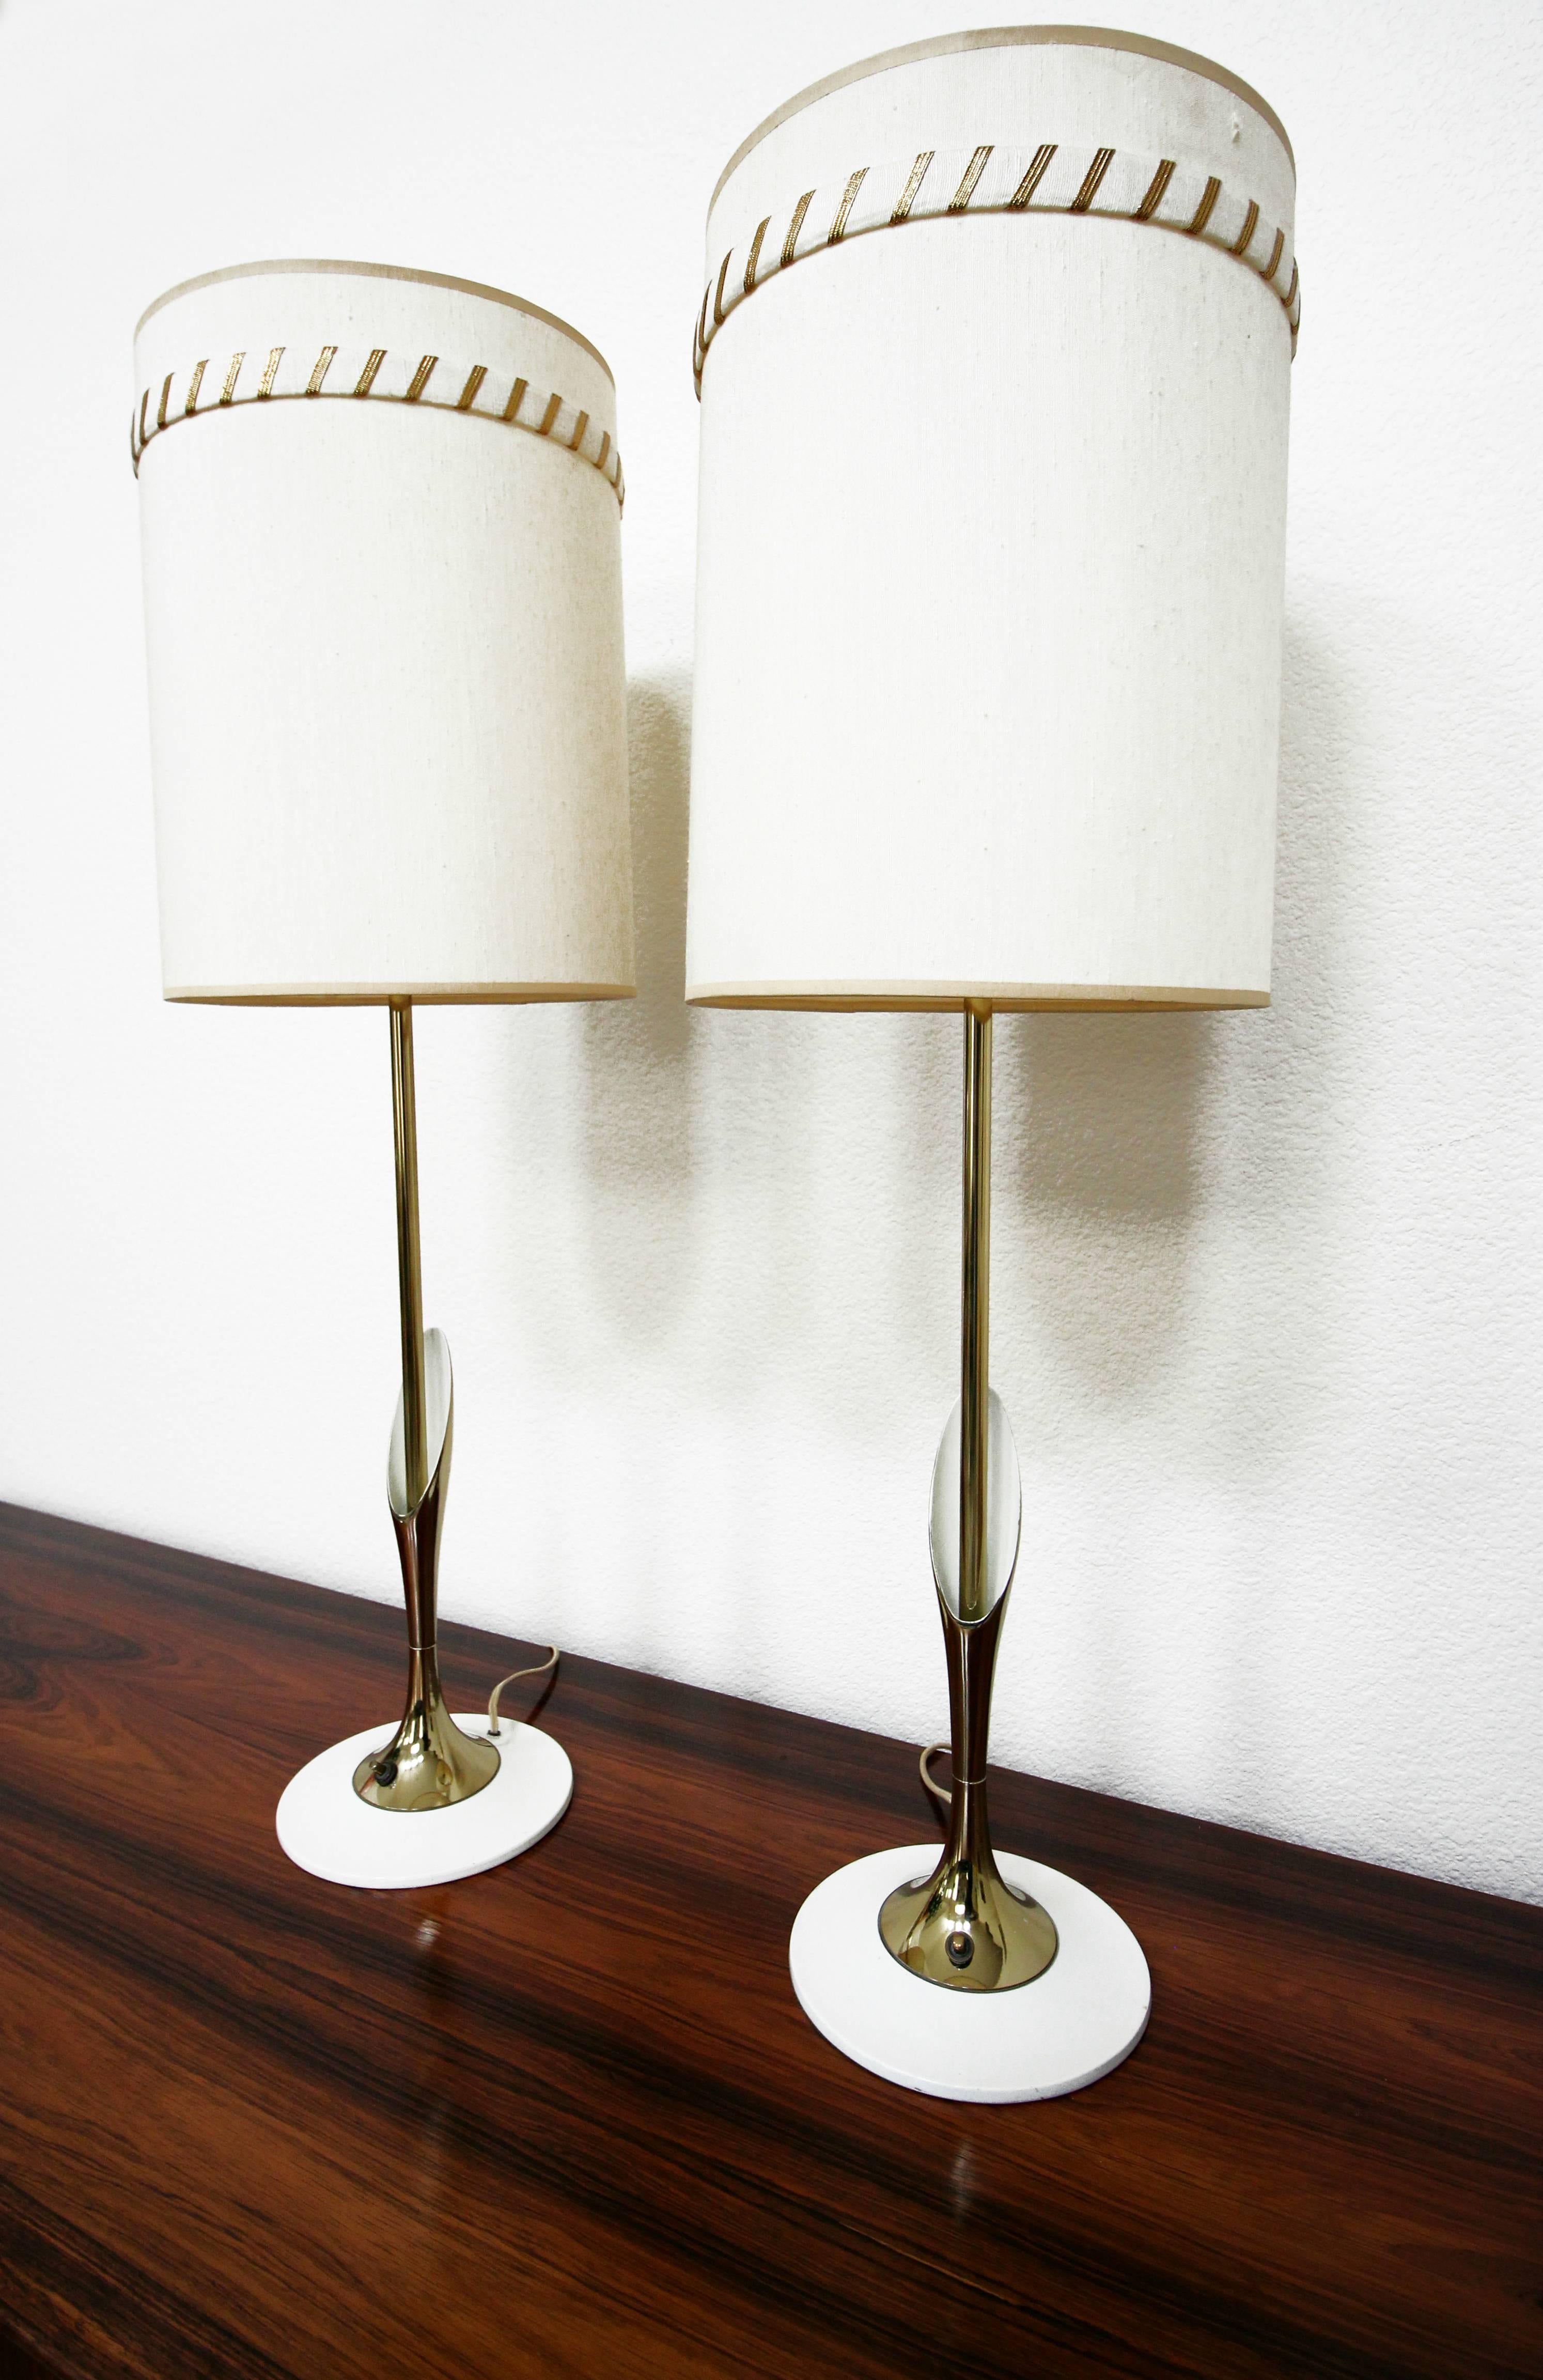 These are a super sleek and slender pair of Mid-Century Modern sculptural brass lamps by Laurel Lamp Company. They have a thin brass stem with a beautiful brass lily style detail and a unique thin white enameled base. 

The lamps are pictured with